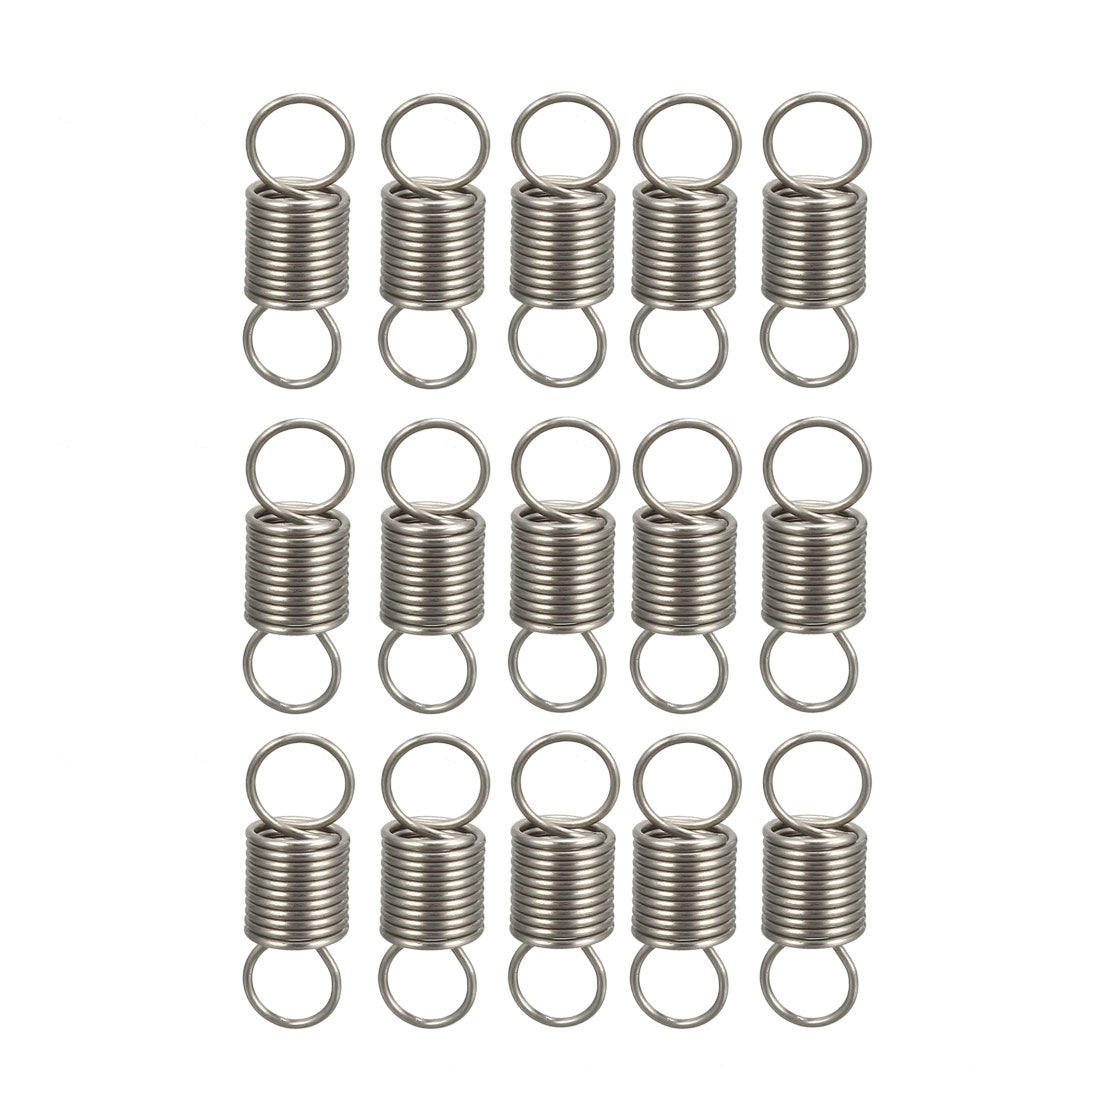 uxcell Uxcell Extended Tension Spring Wire Diameter 0.02", OD 0.2", Free Length 0.59" 15pcs